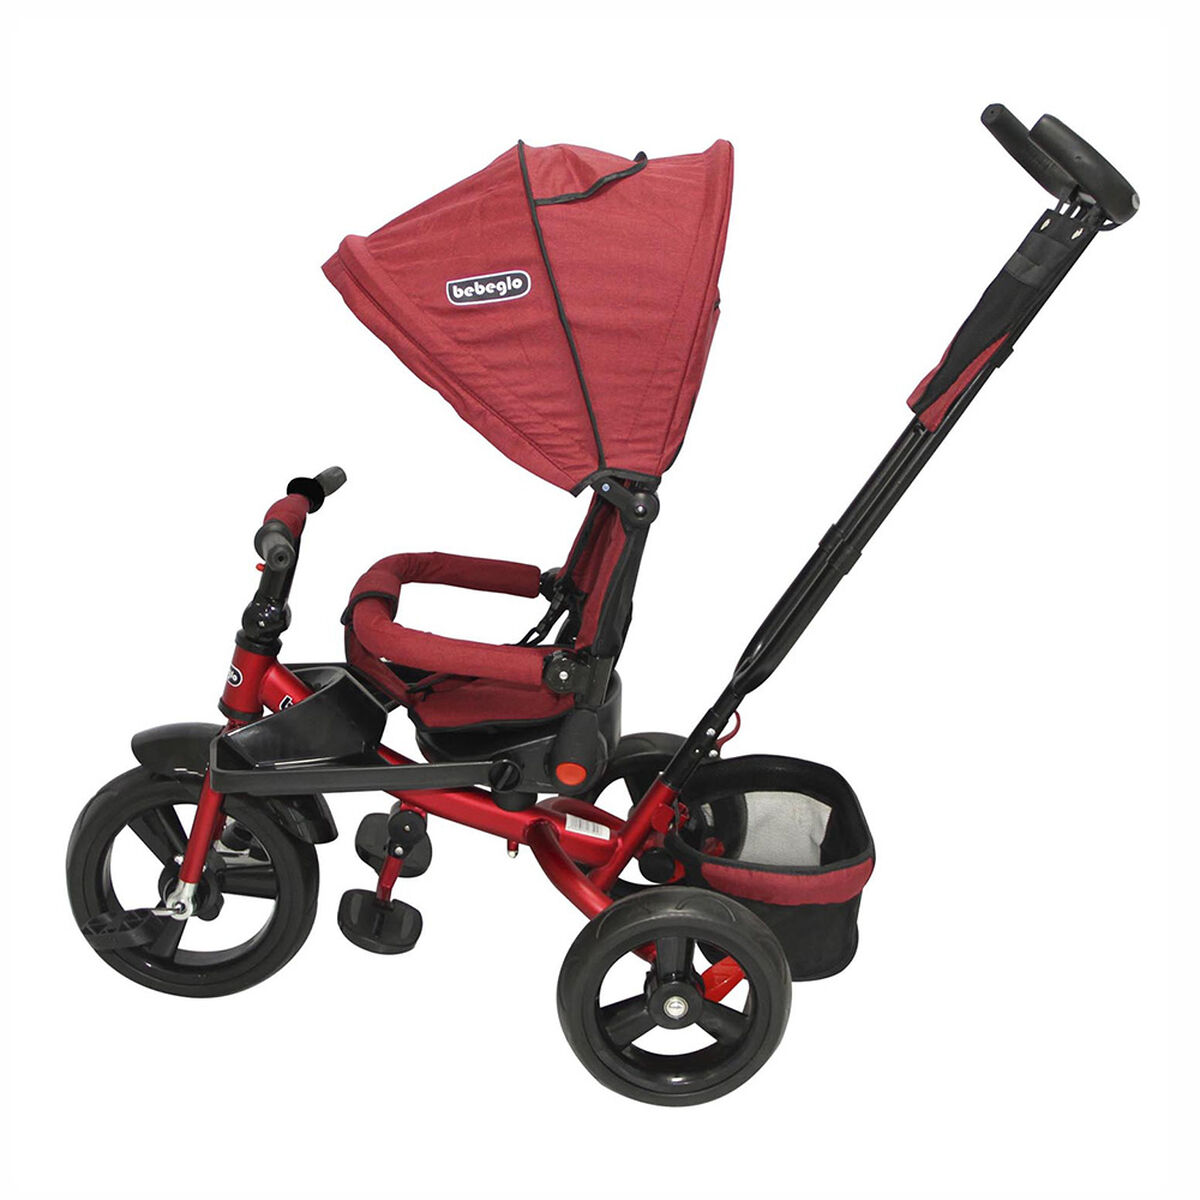 Triciclo Coche Reversible One Click RS-4075Q